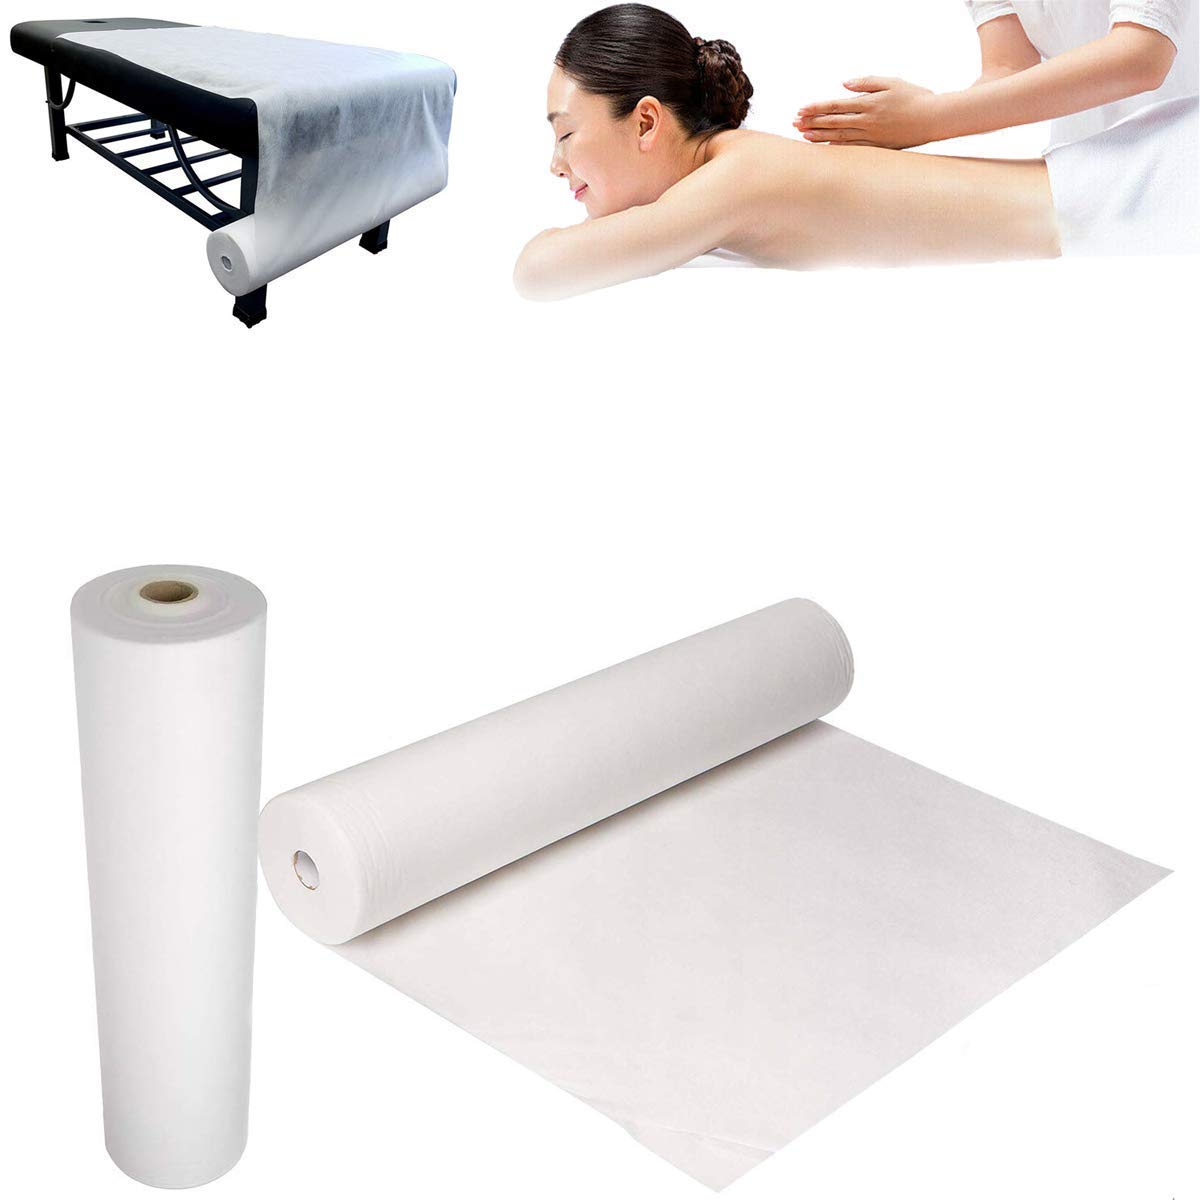 Standard Medical Exam Table Paper Roll Smooth 21" x 225'paper roll with Case of 12 Rolls